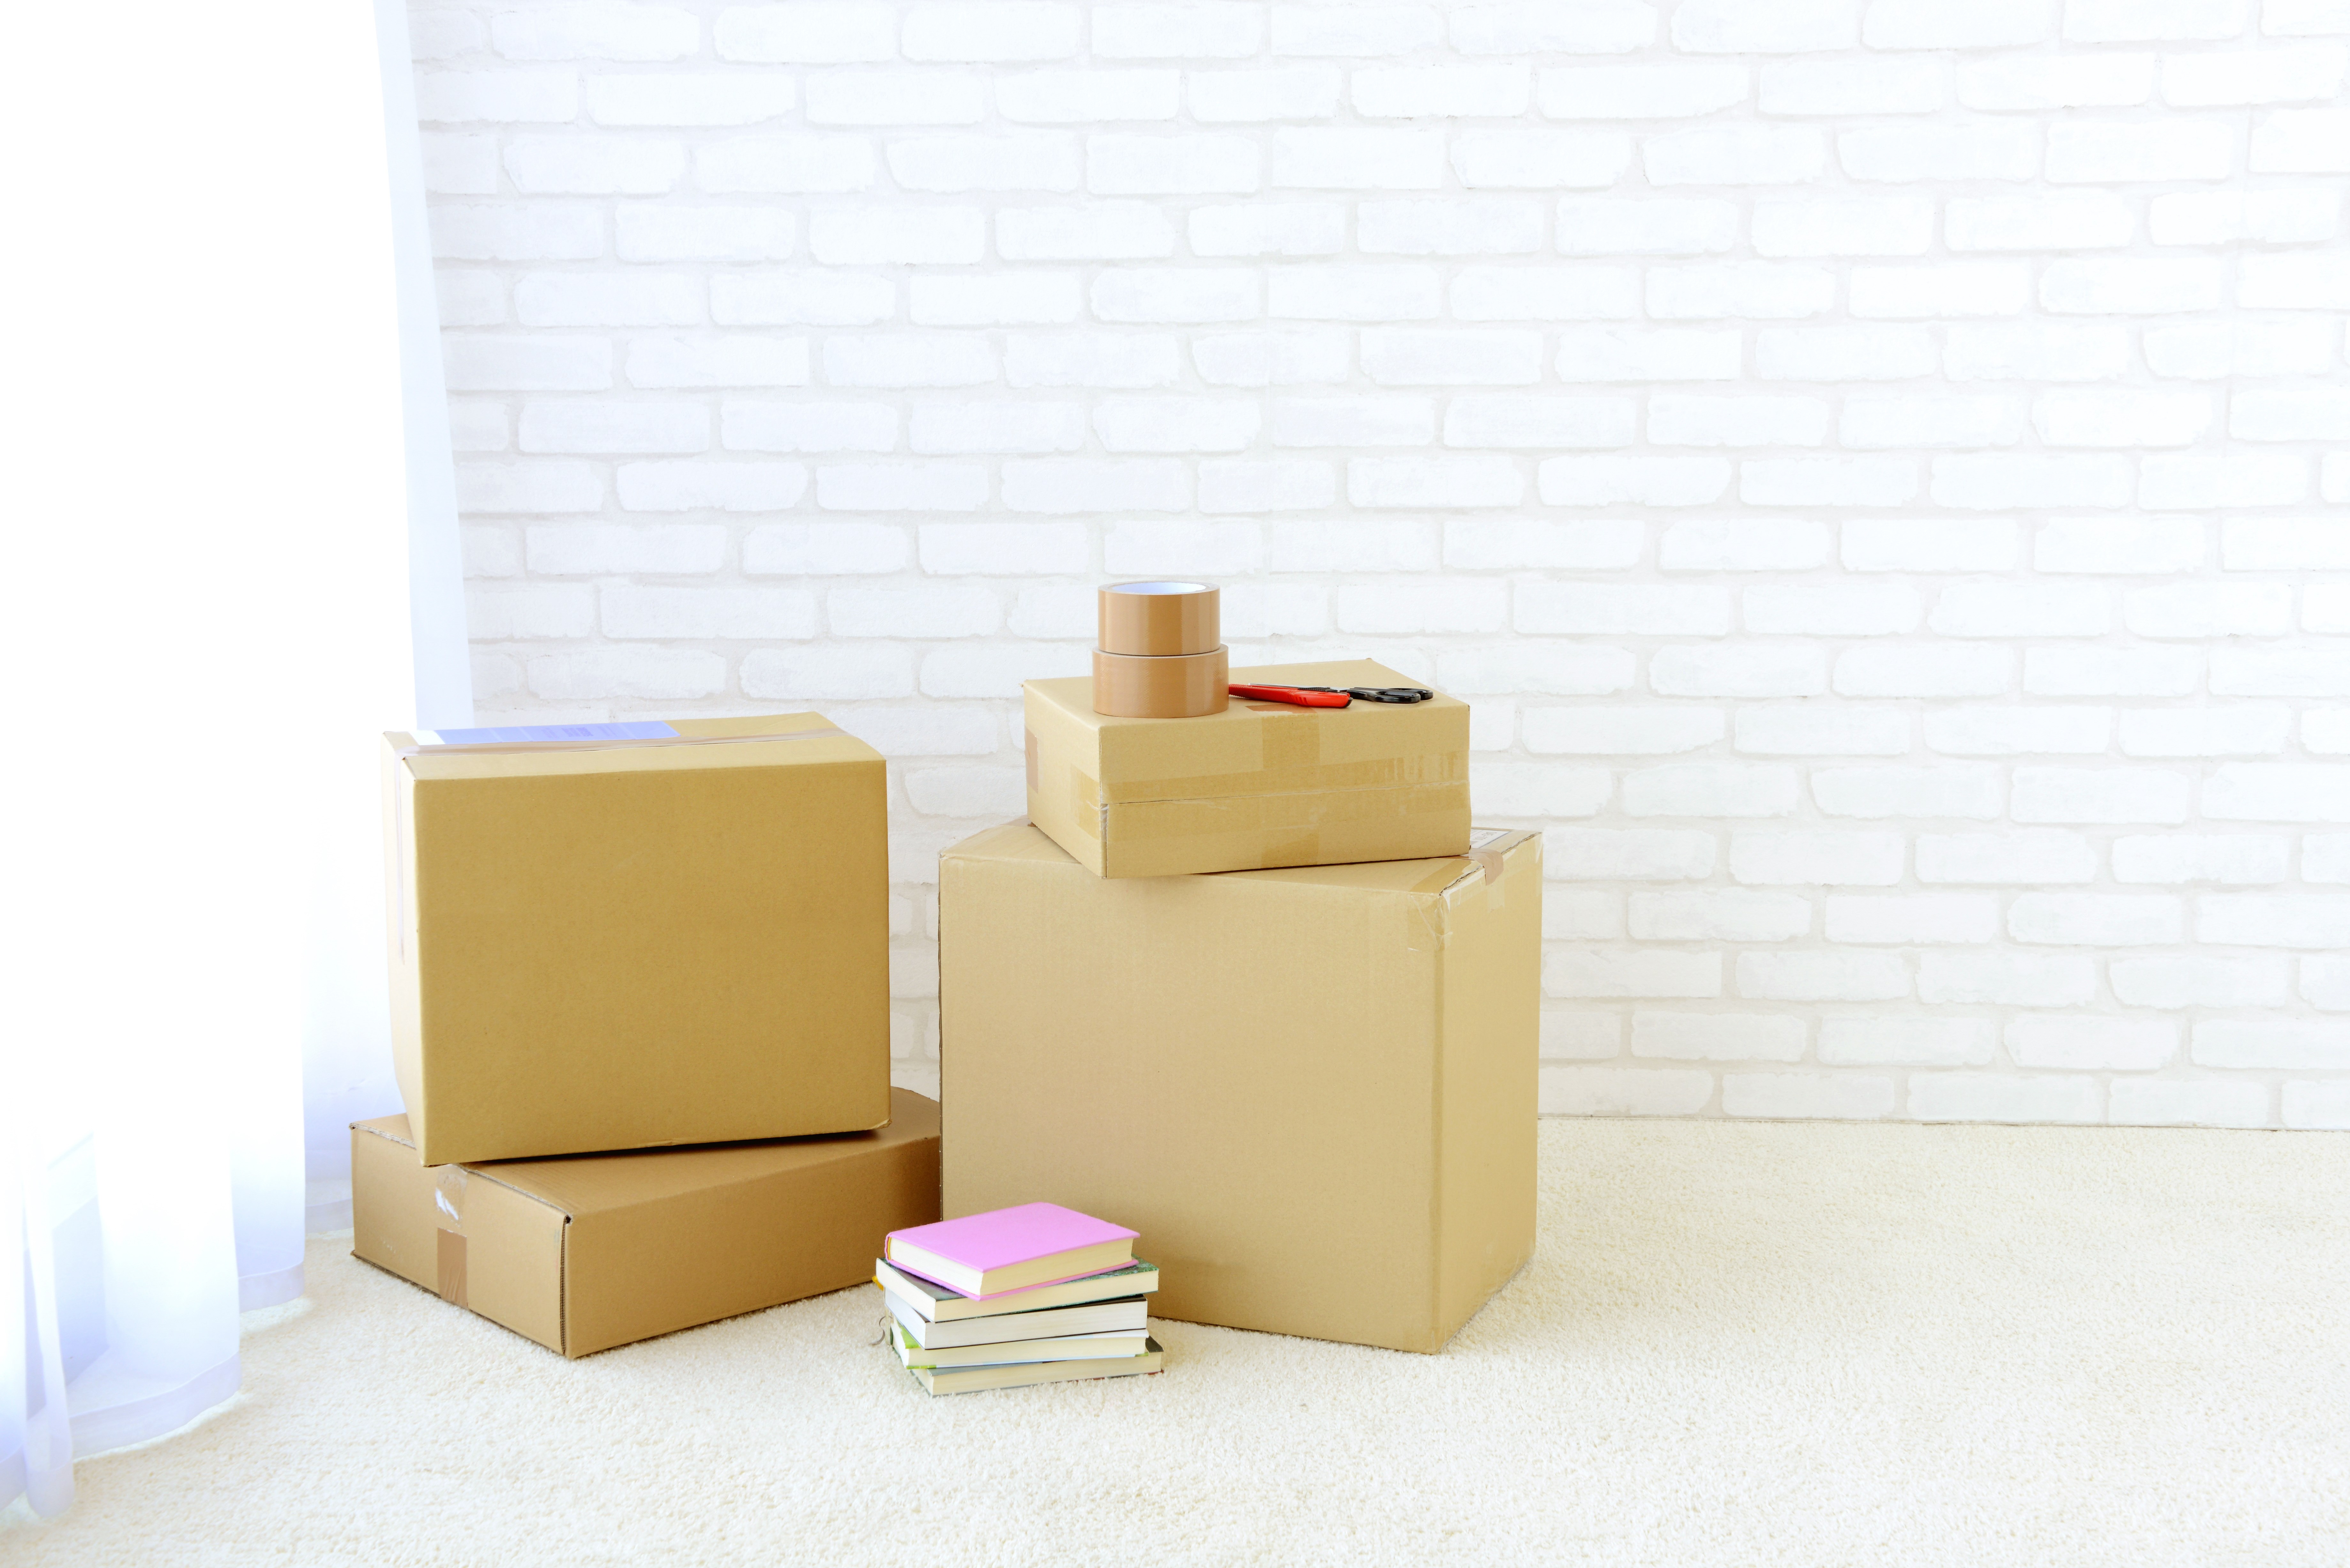 Before you move all of your furniture into your new home, let BISSELL Rental help you give it a deep cleaning.